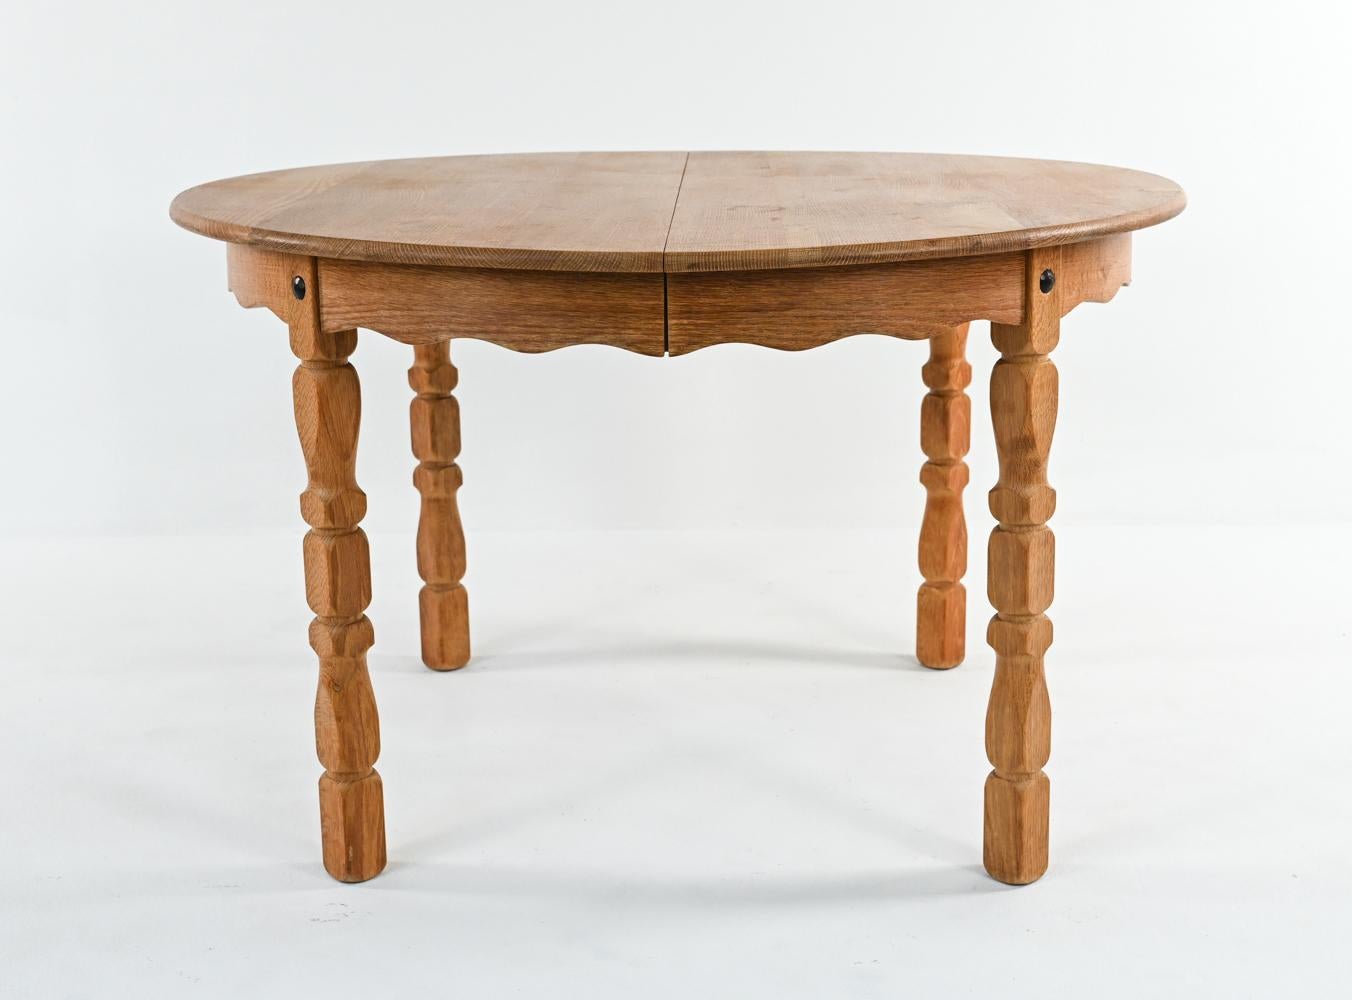 Constructed from beautiful quarter-sawn tiger oak, this Scandinavian dining table features a farmhouse-inspired round top and scalloped apron, with distinctive carved legs in the style of Henning Kjærnulf. This combination of traditional and modern